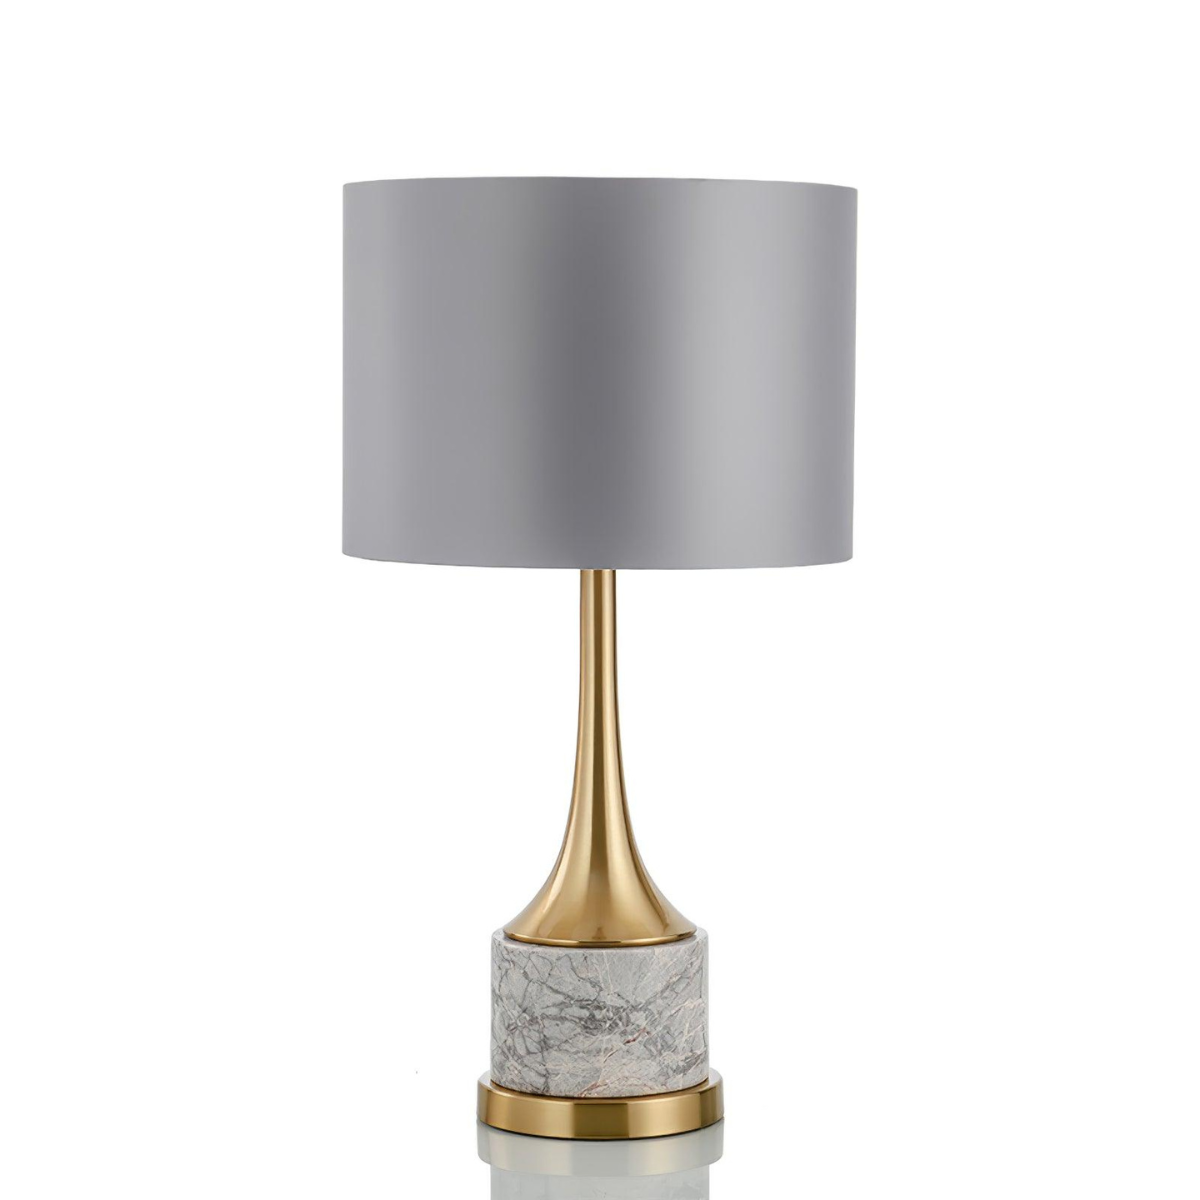 Dominion-Metal-Based-Modern-Bedside-Table-Lamp-7